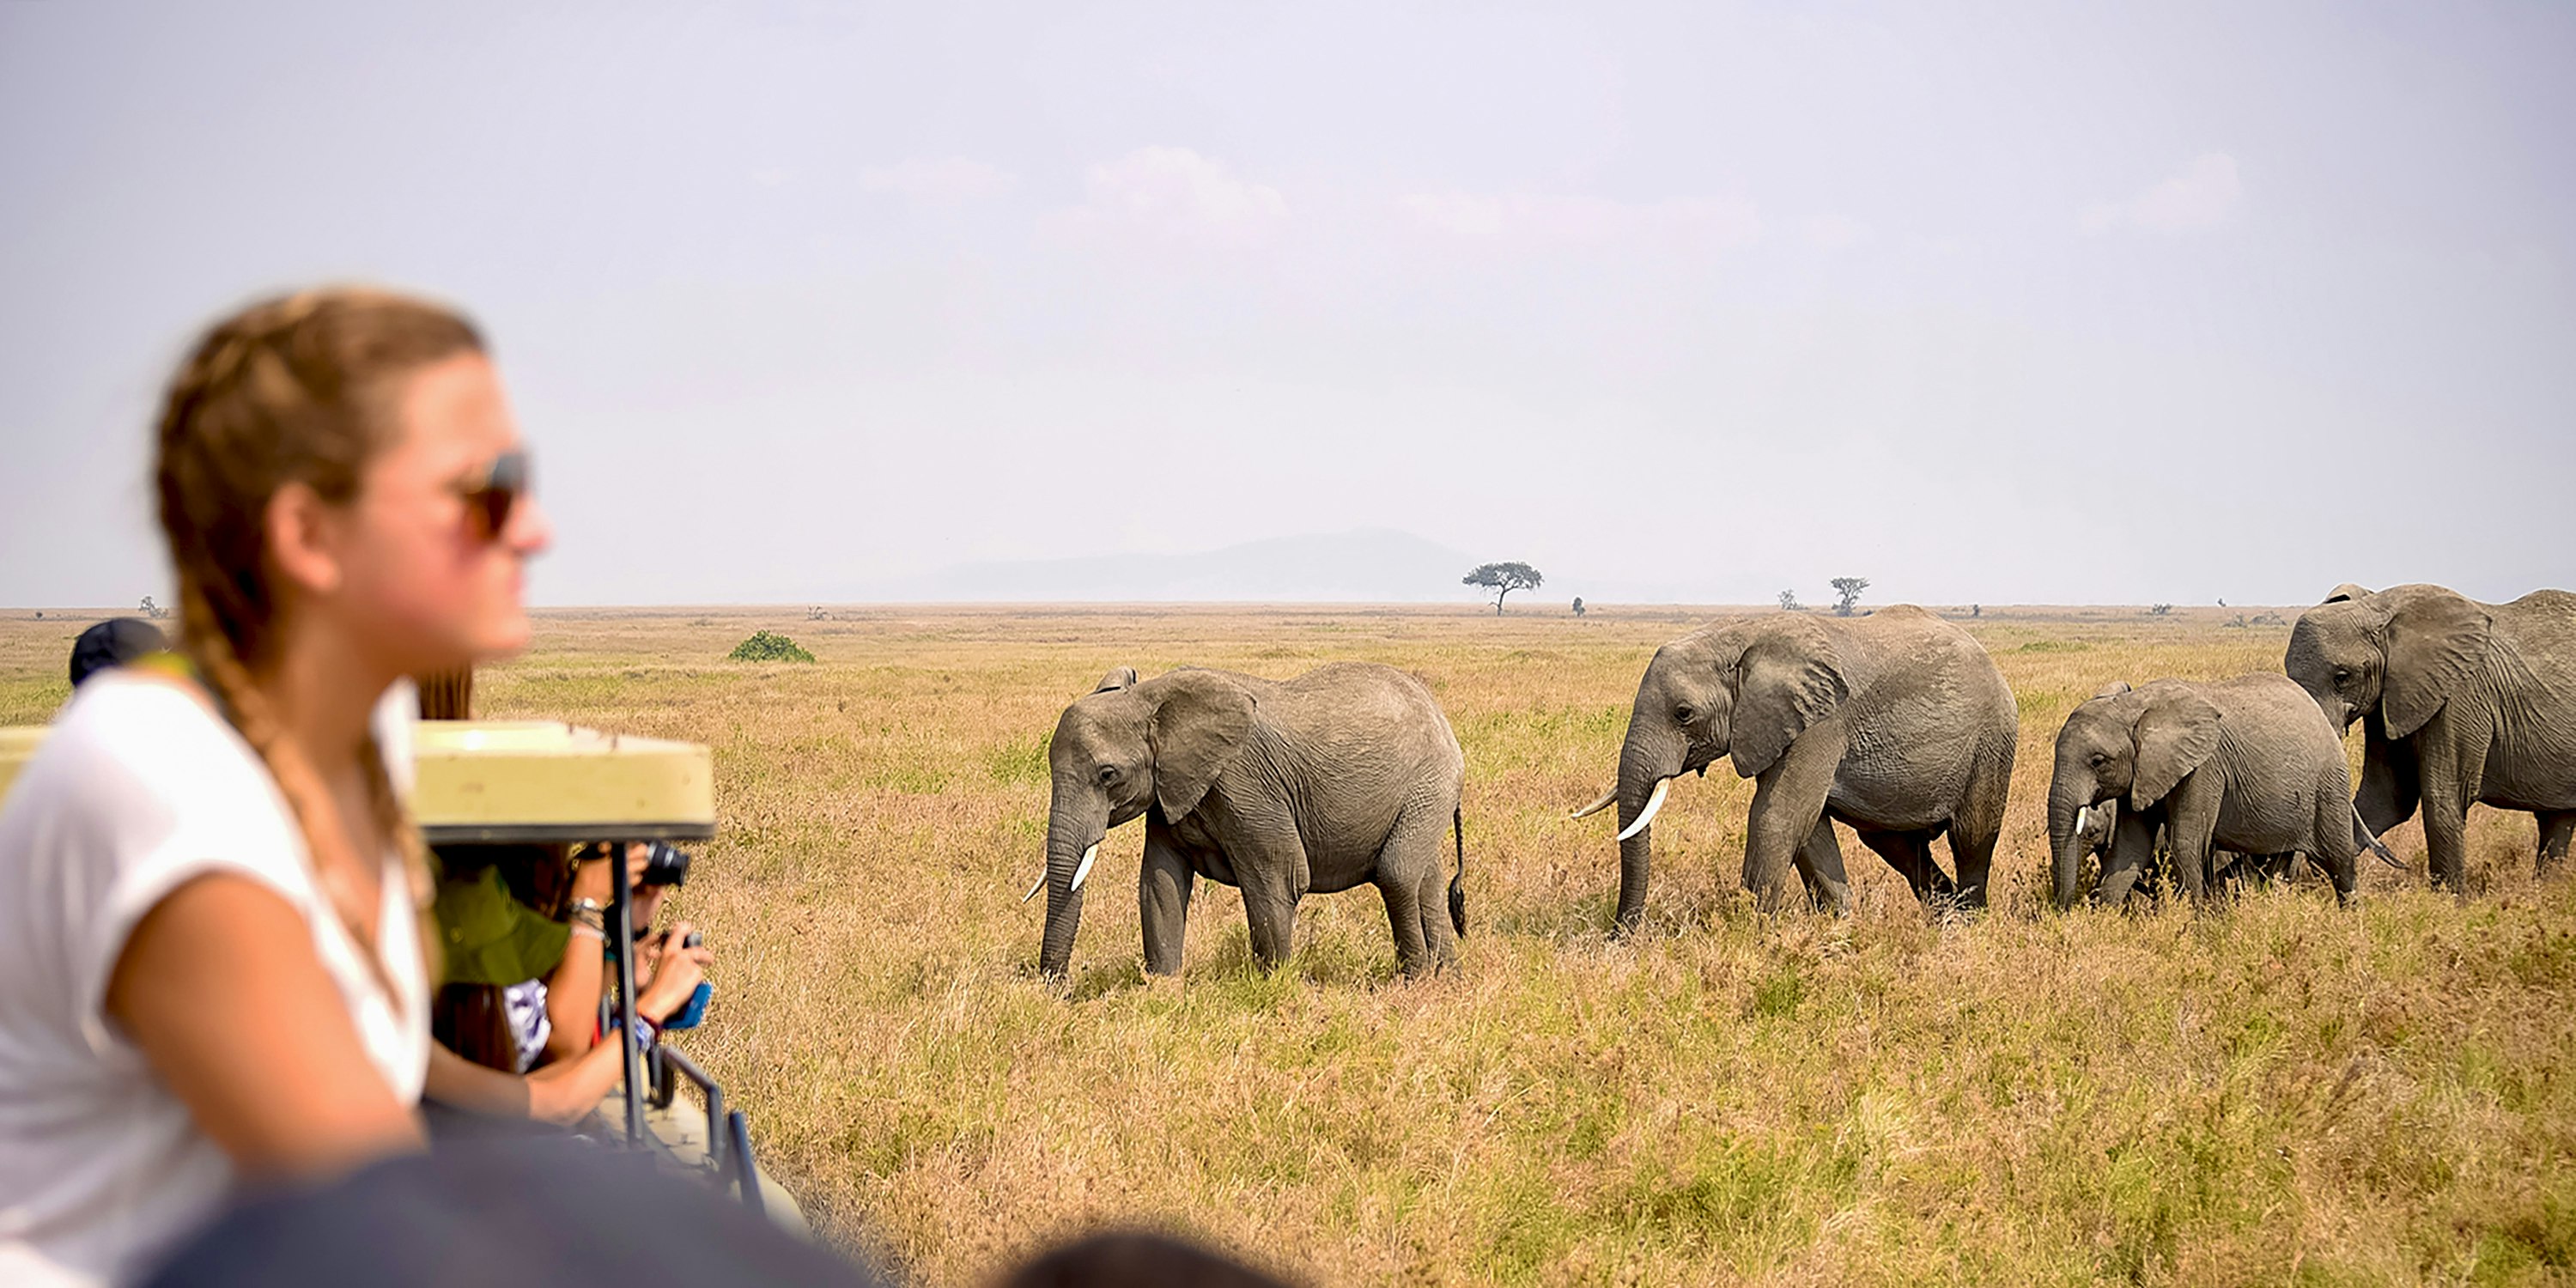 Animal Adventures: Where Students Can Best Learn About Wildlife While Traveling